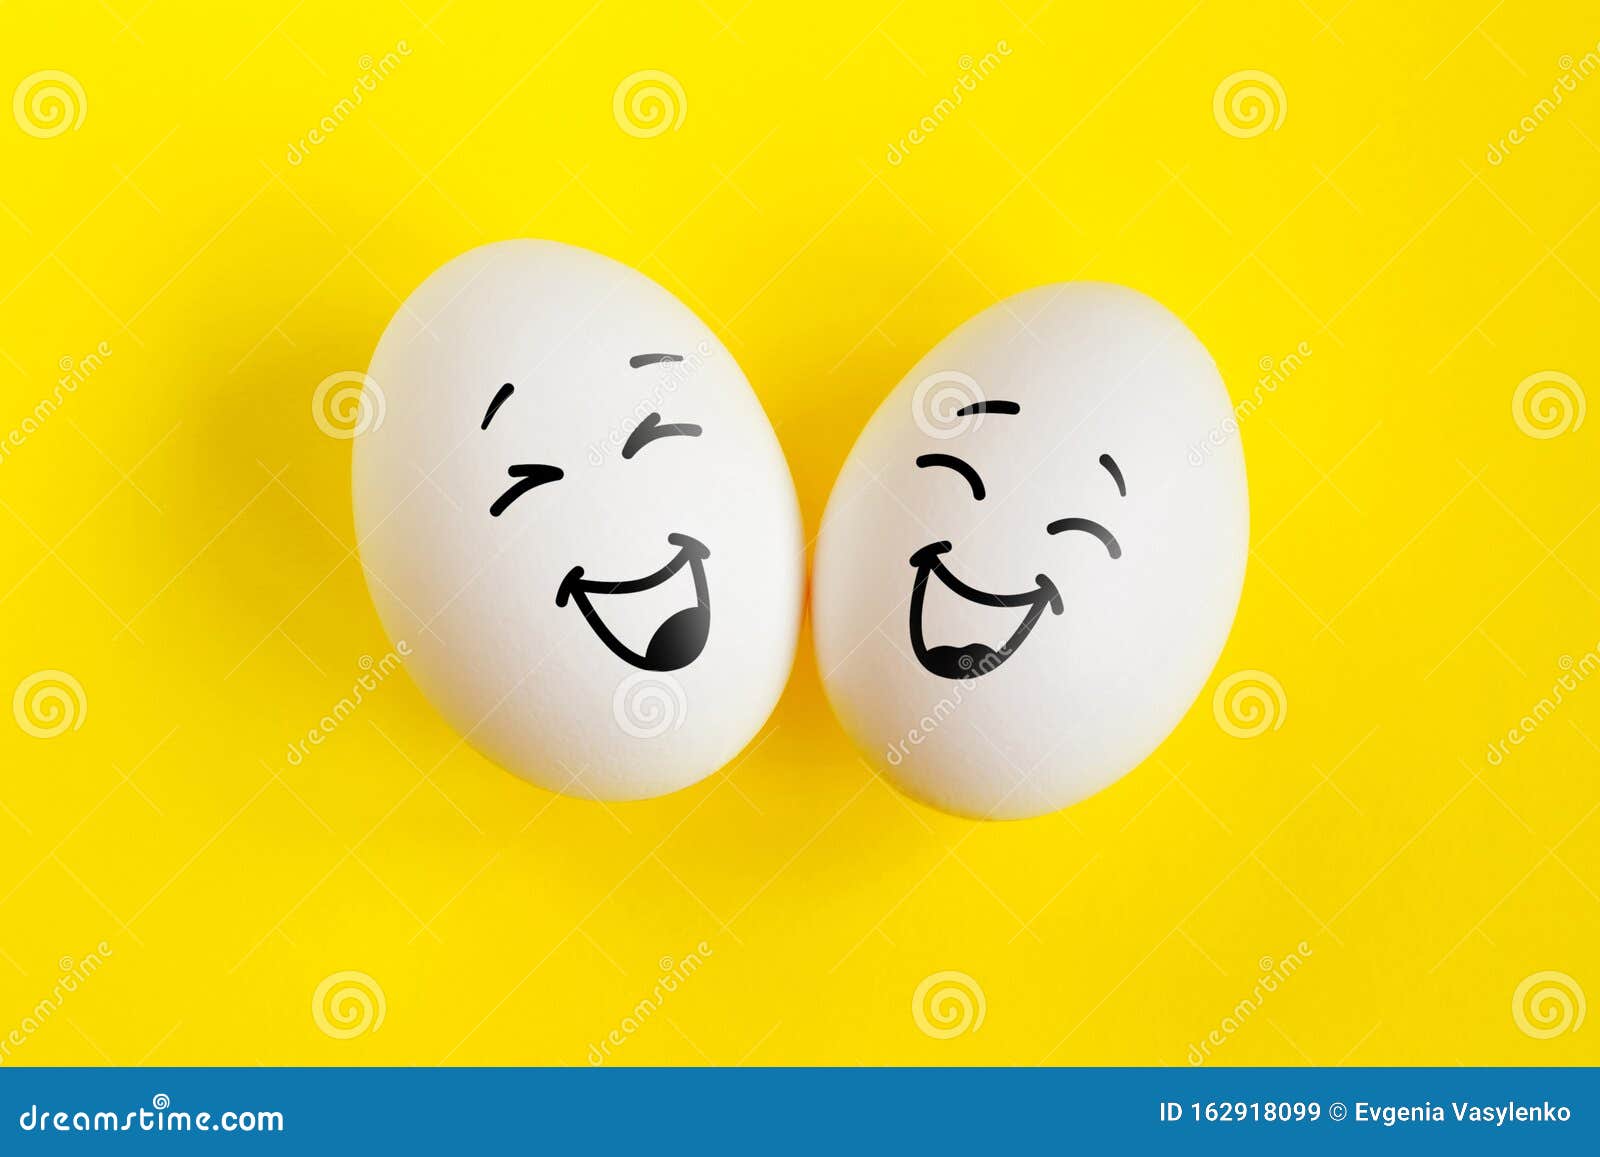 two white eggs on yellow background concept. emotions laughter and happiness.